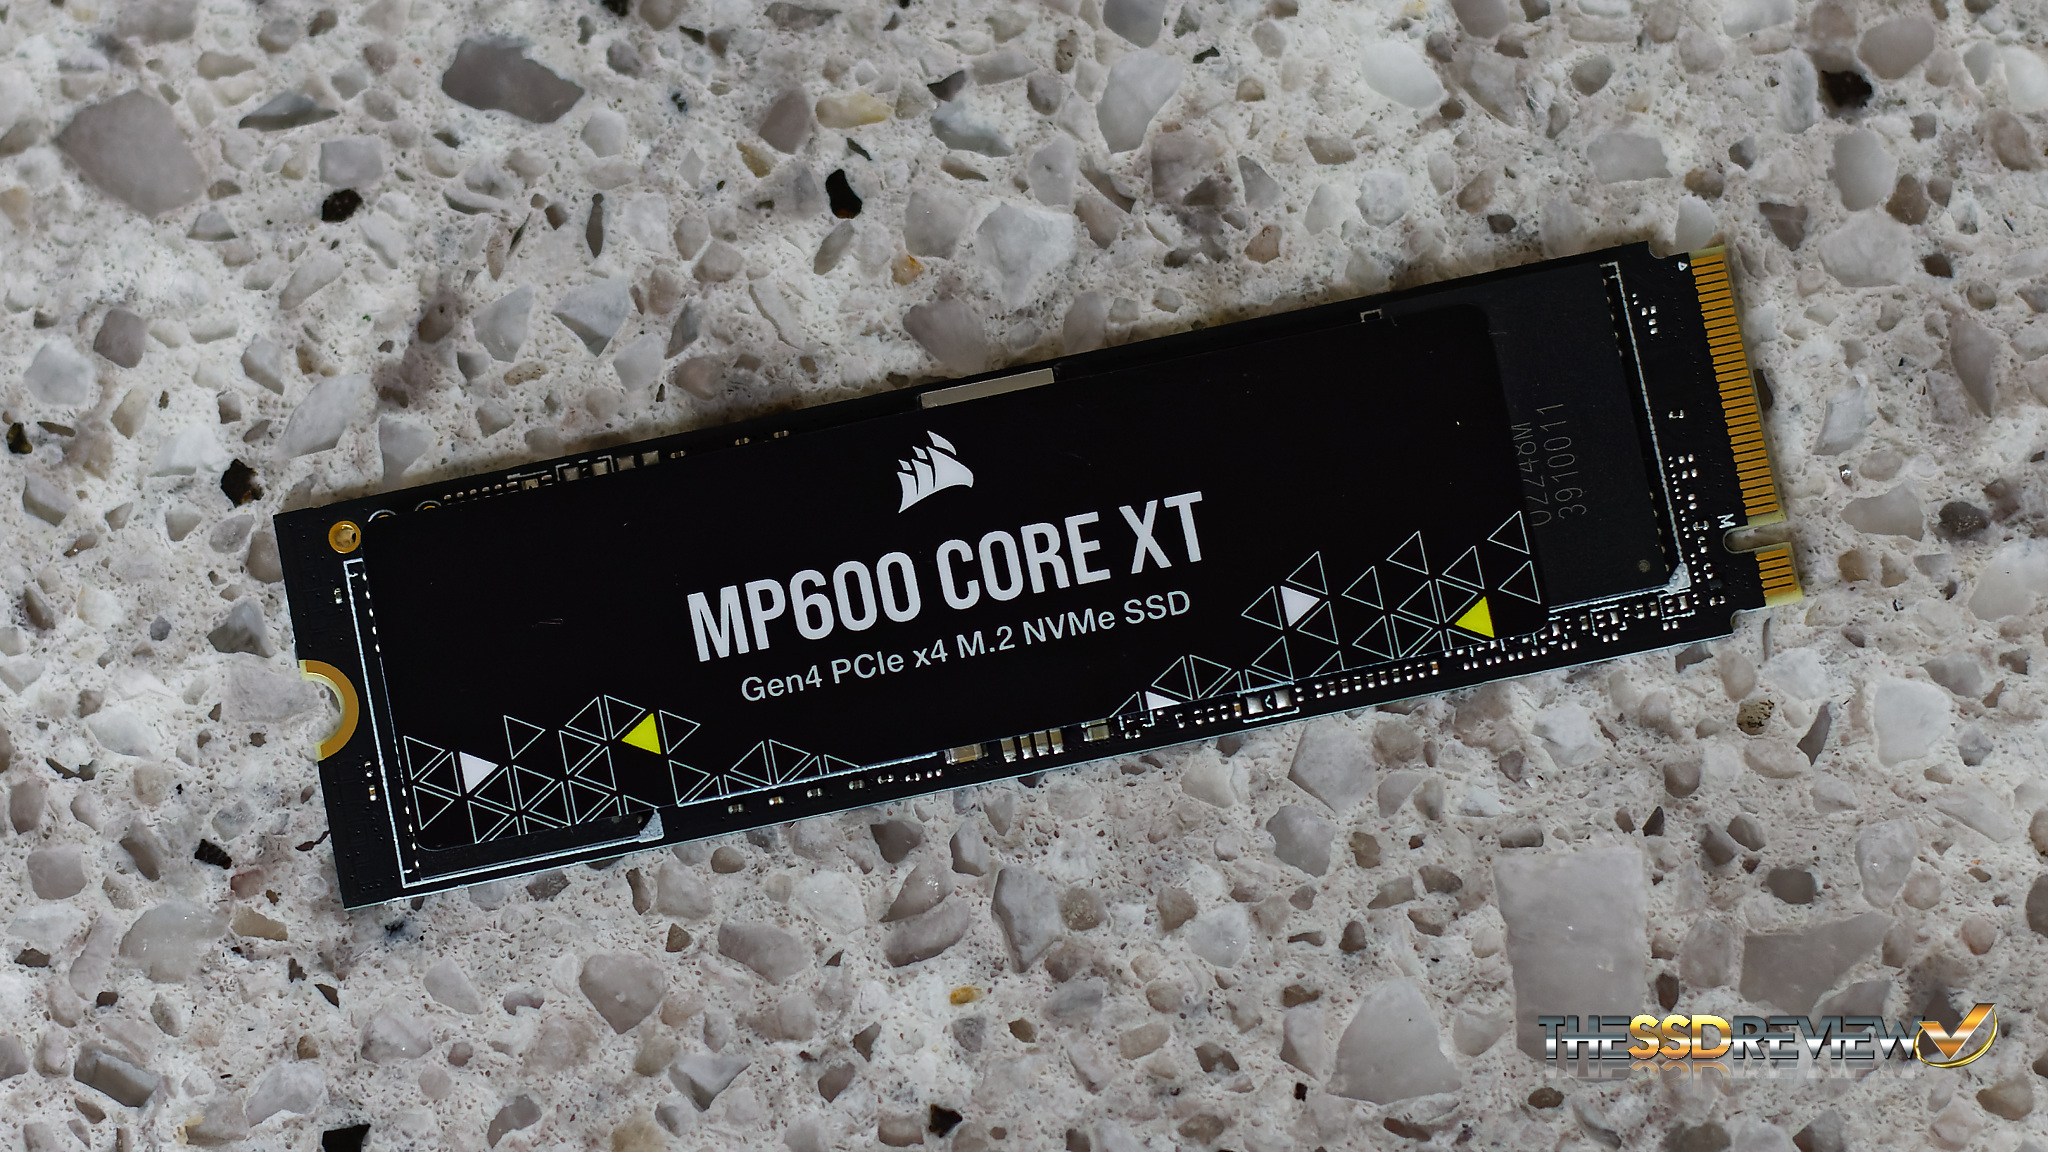 dommer Arbitrage smykker Corsair MP600 Core XT 2TB SSD Review - Great Value Achieved through a Fast  DRAMless QLC Design | The SSD Review